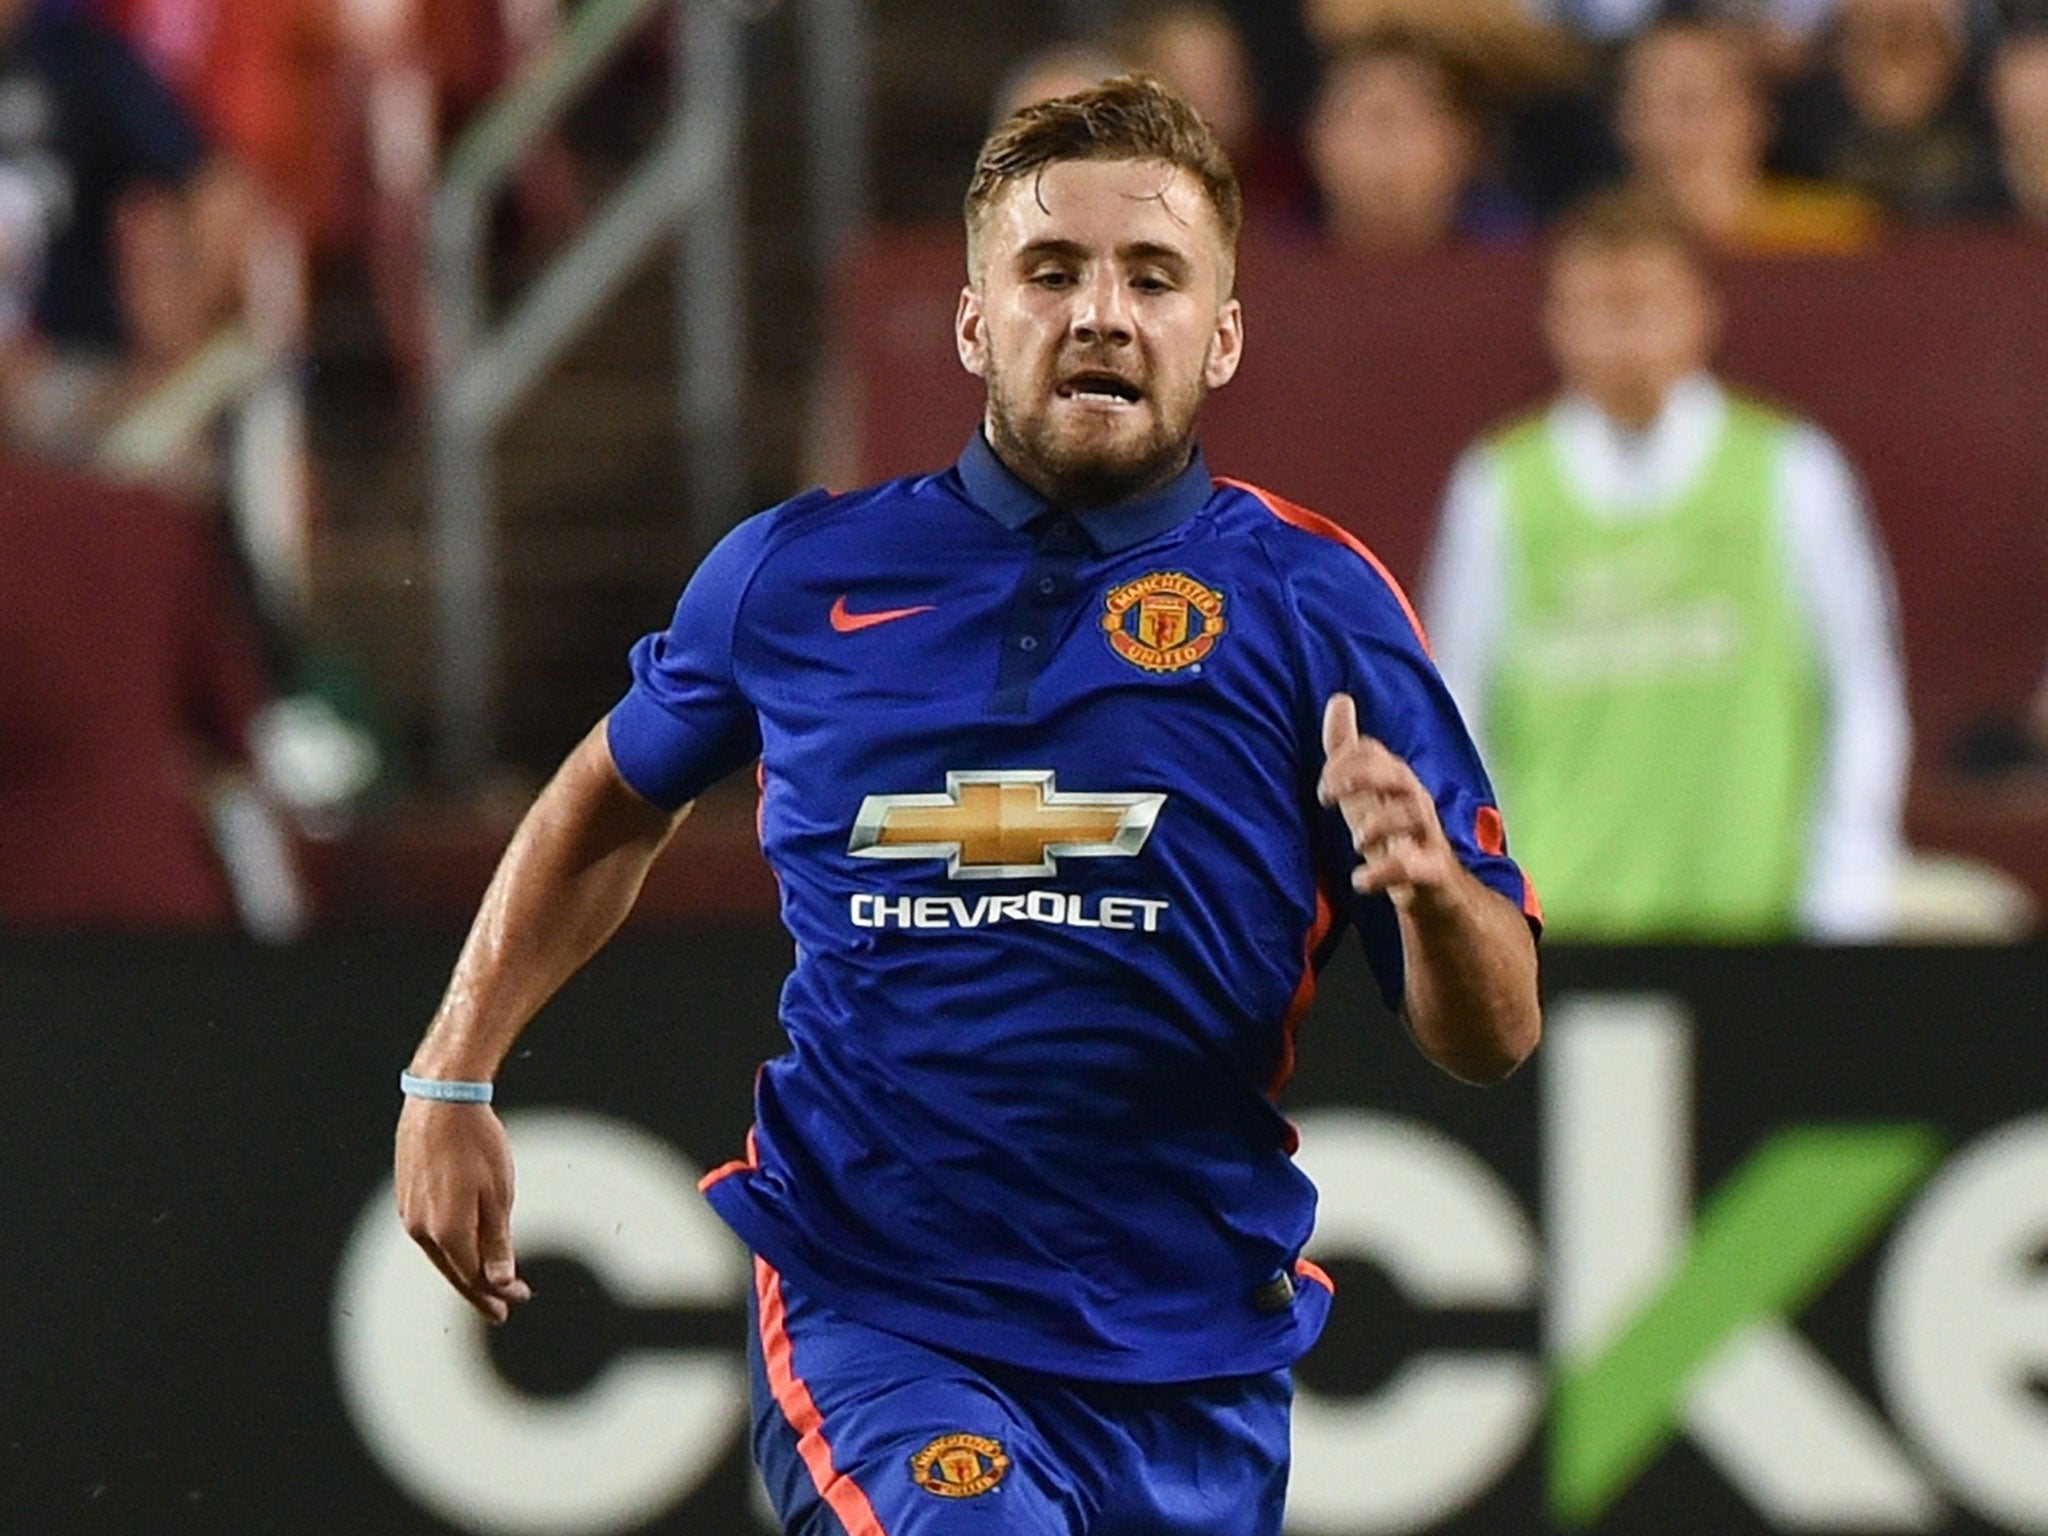 Luke Shaw in action during Manchester United's pre-season